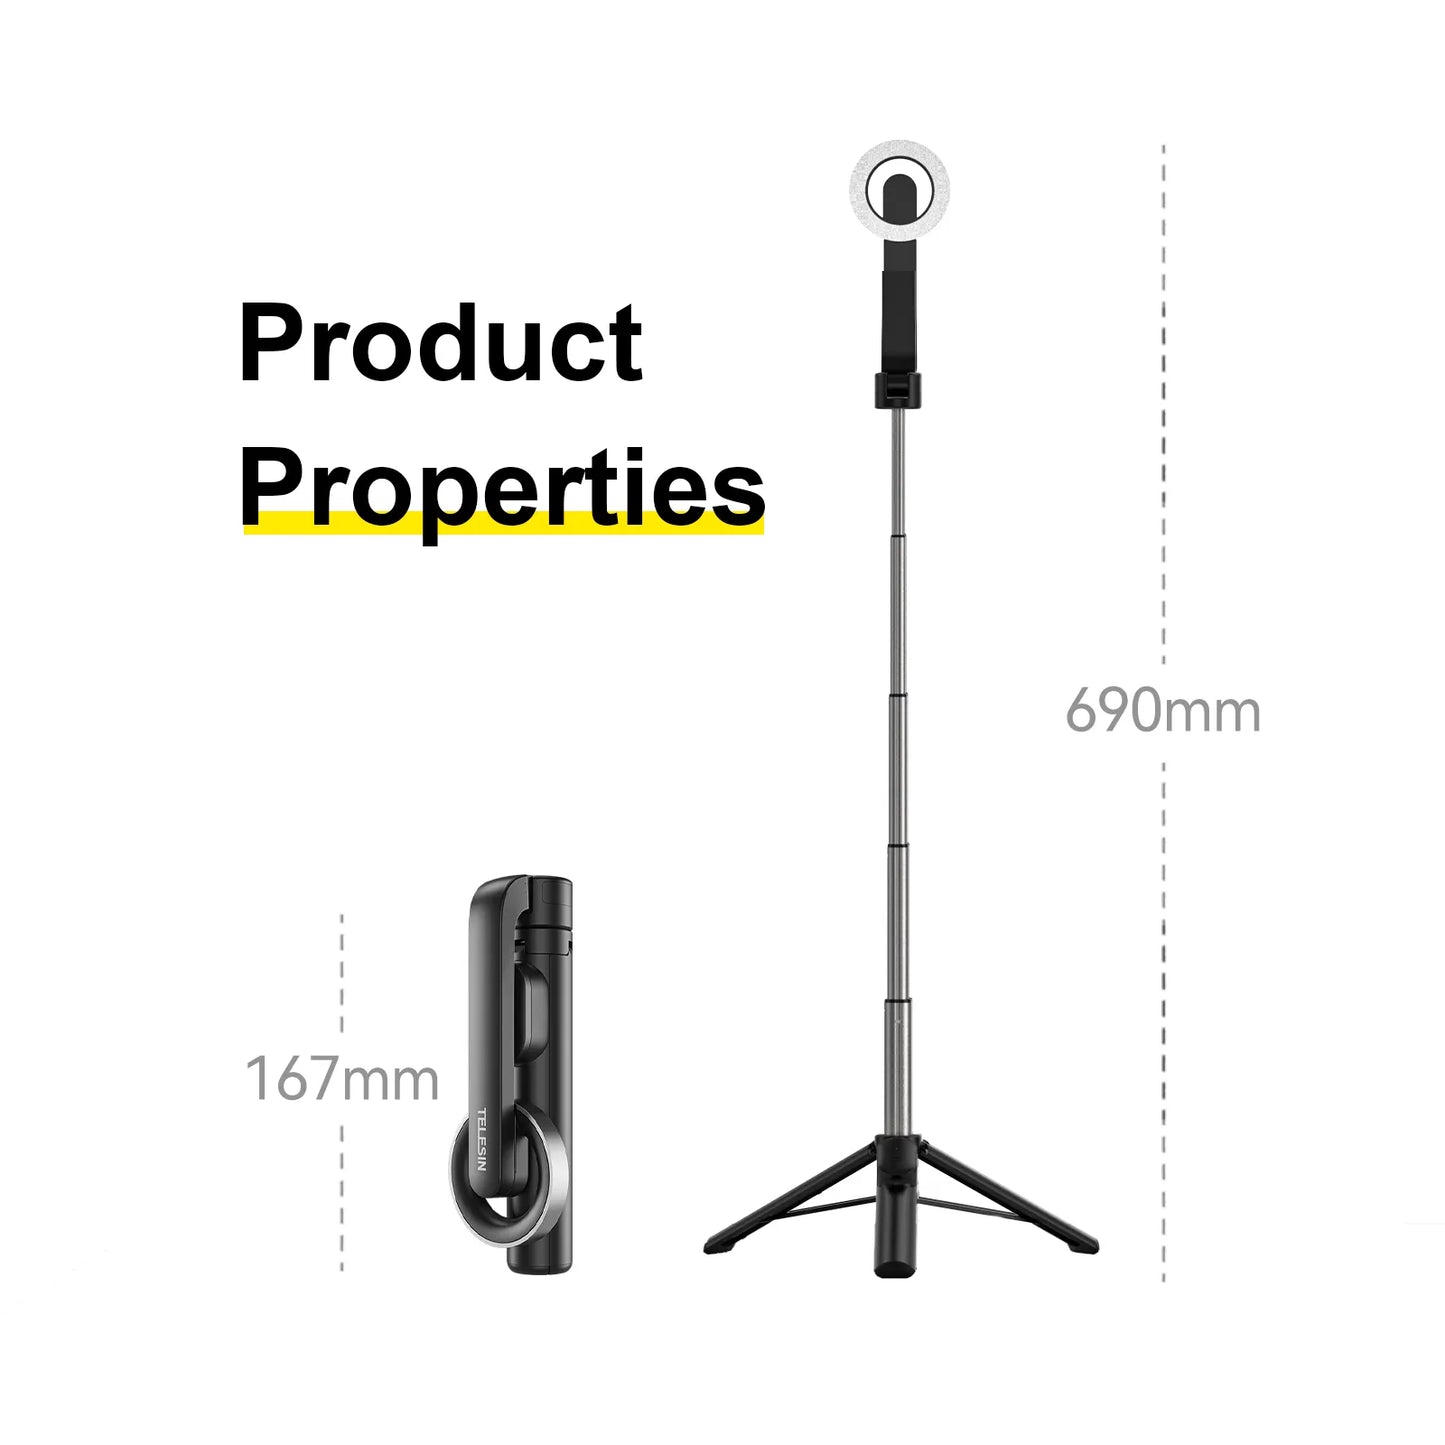 TELESIN Magnetic Selfie Stick Tripod with Remote For Cellphone For iPhone 14 13 12 Pro Max For HUAWEI XIAOMI SAMSUNG